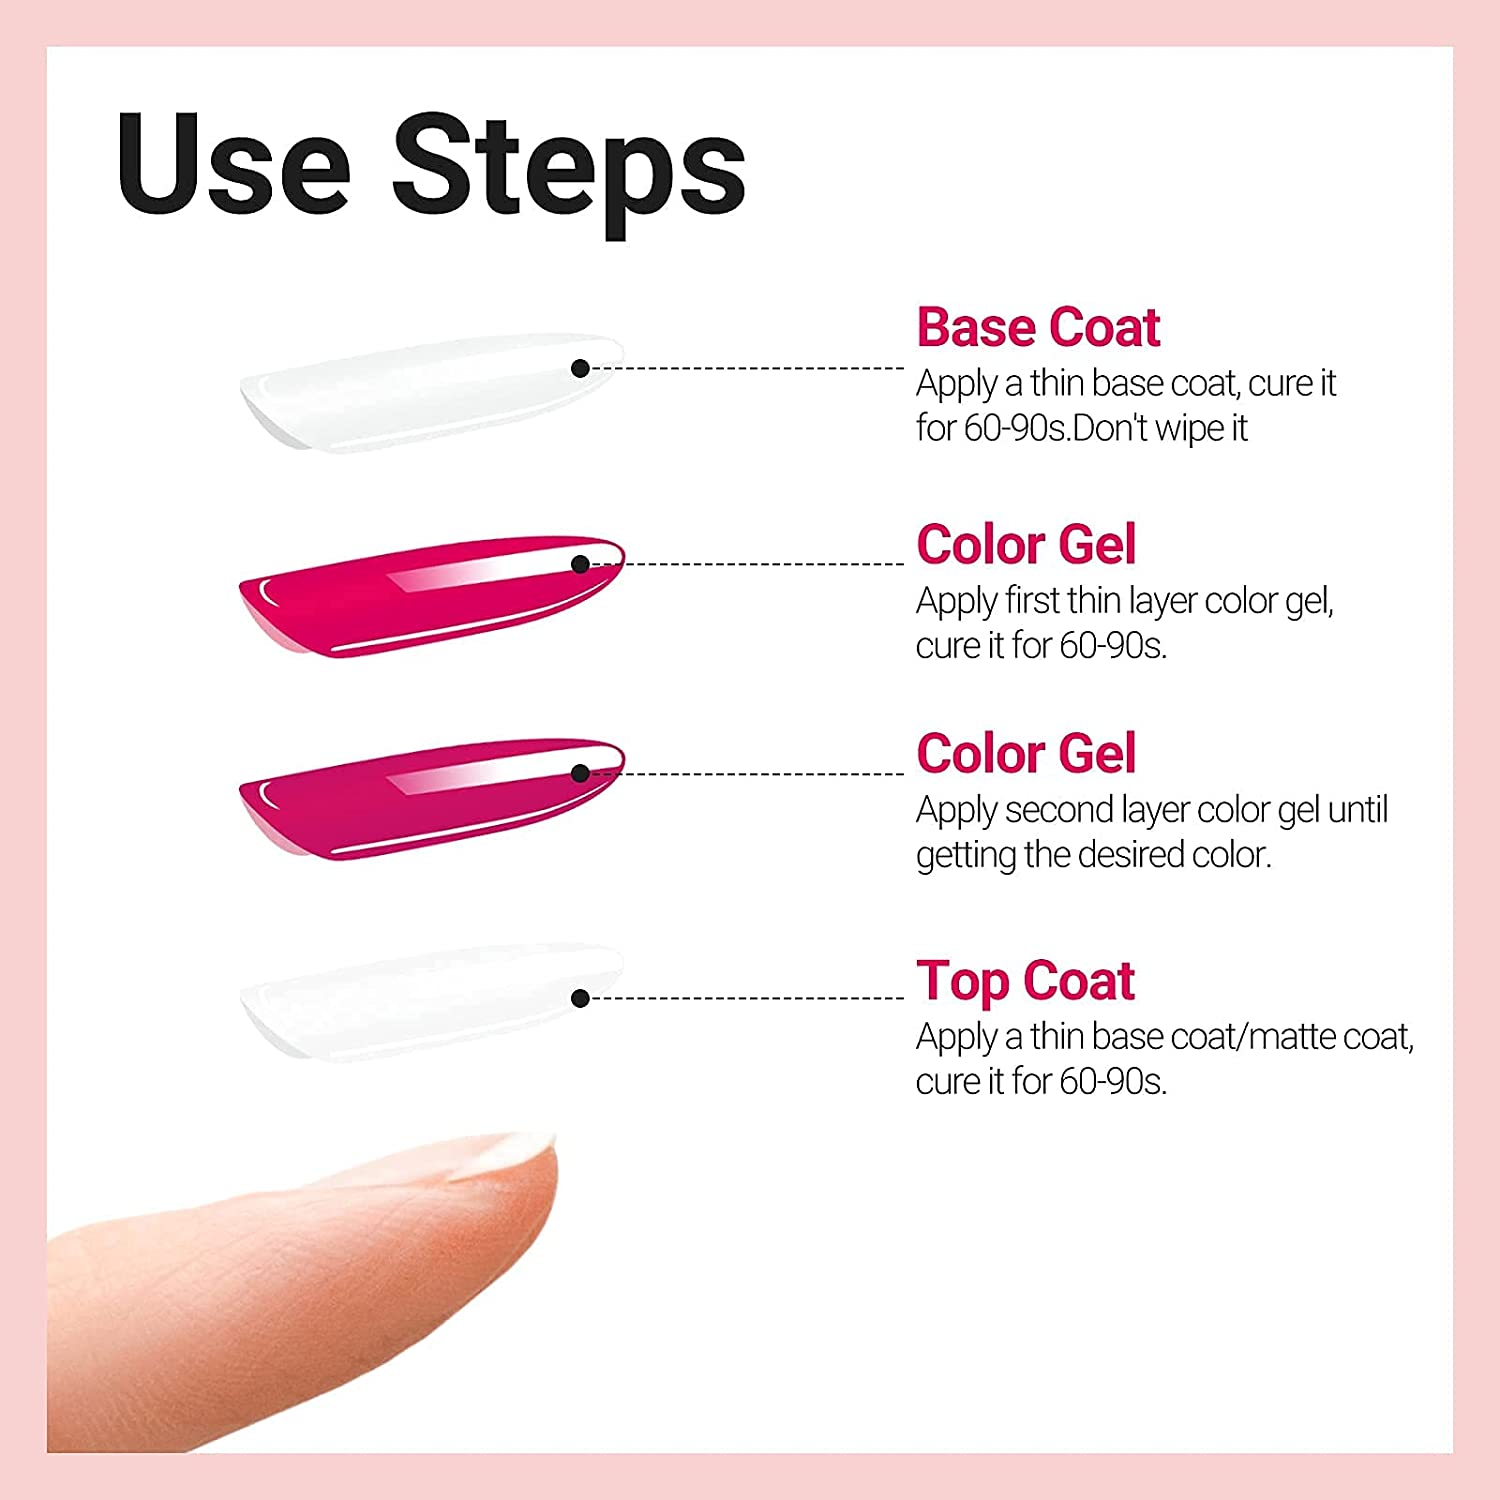 Transform Your Broken Nail with Gel Polish: A Step-by-Step Guide